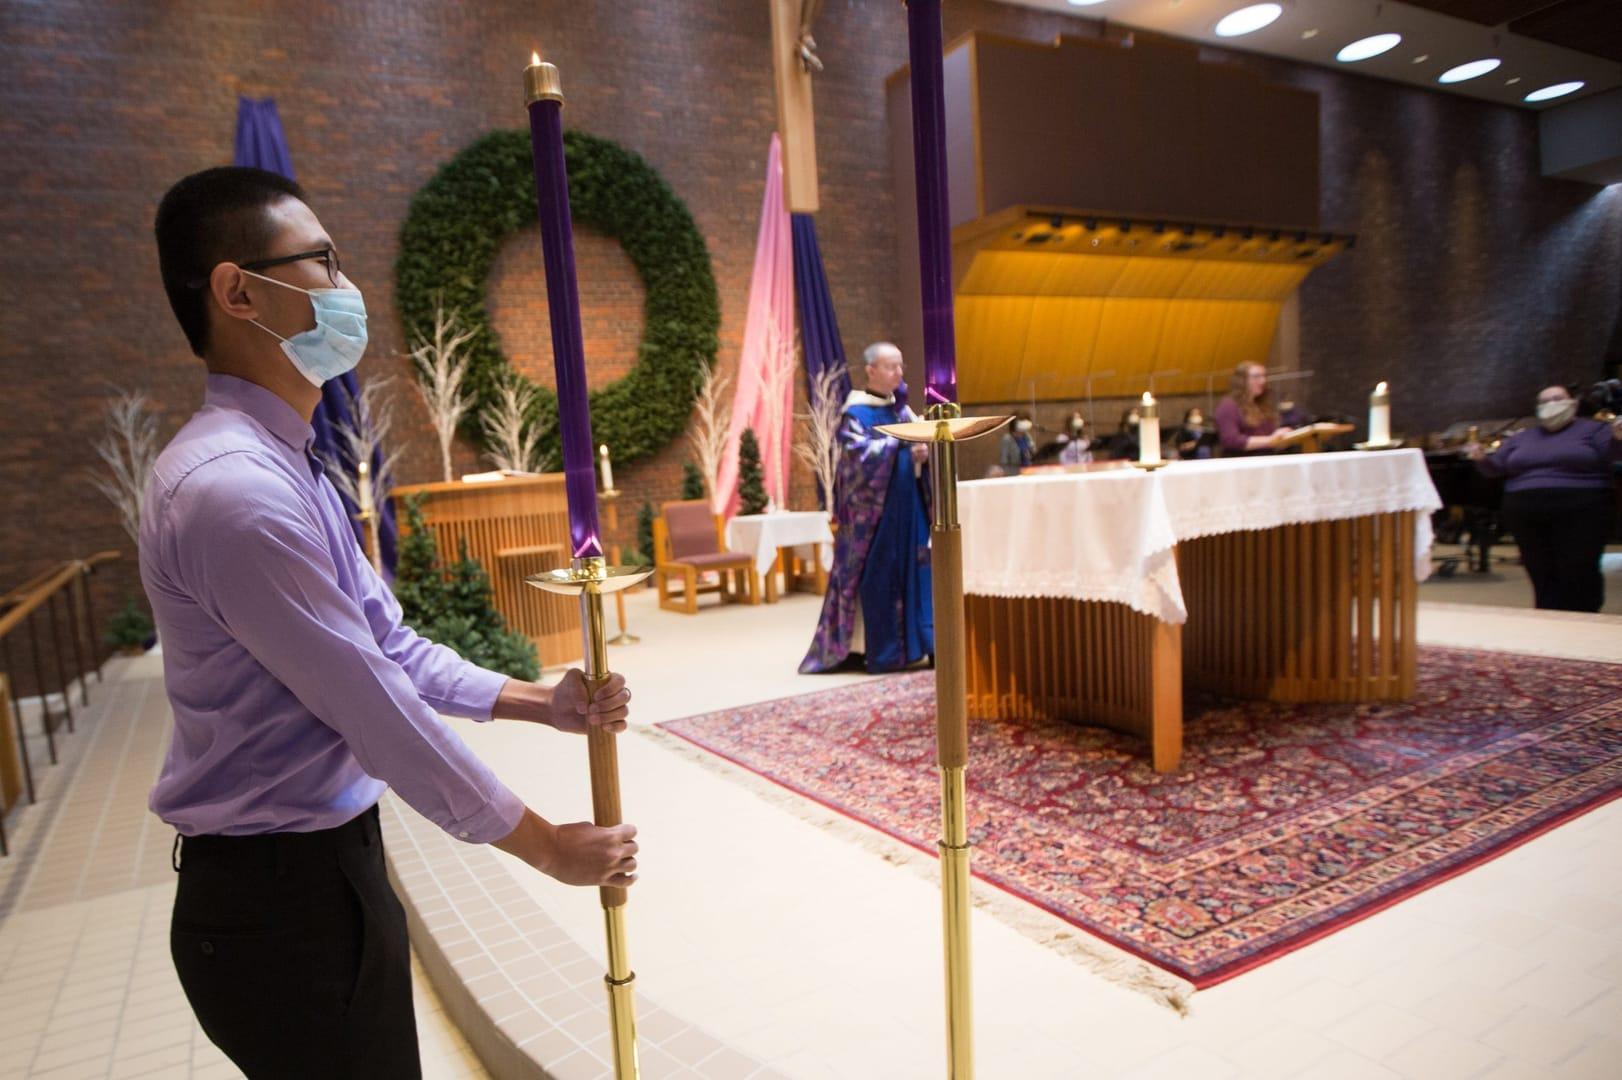 Catholics say they’re able to deepen their approach to Advent season this year